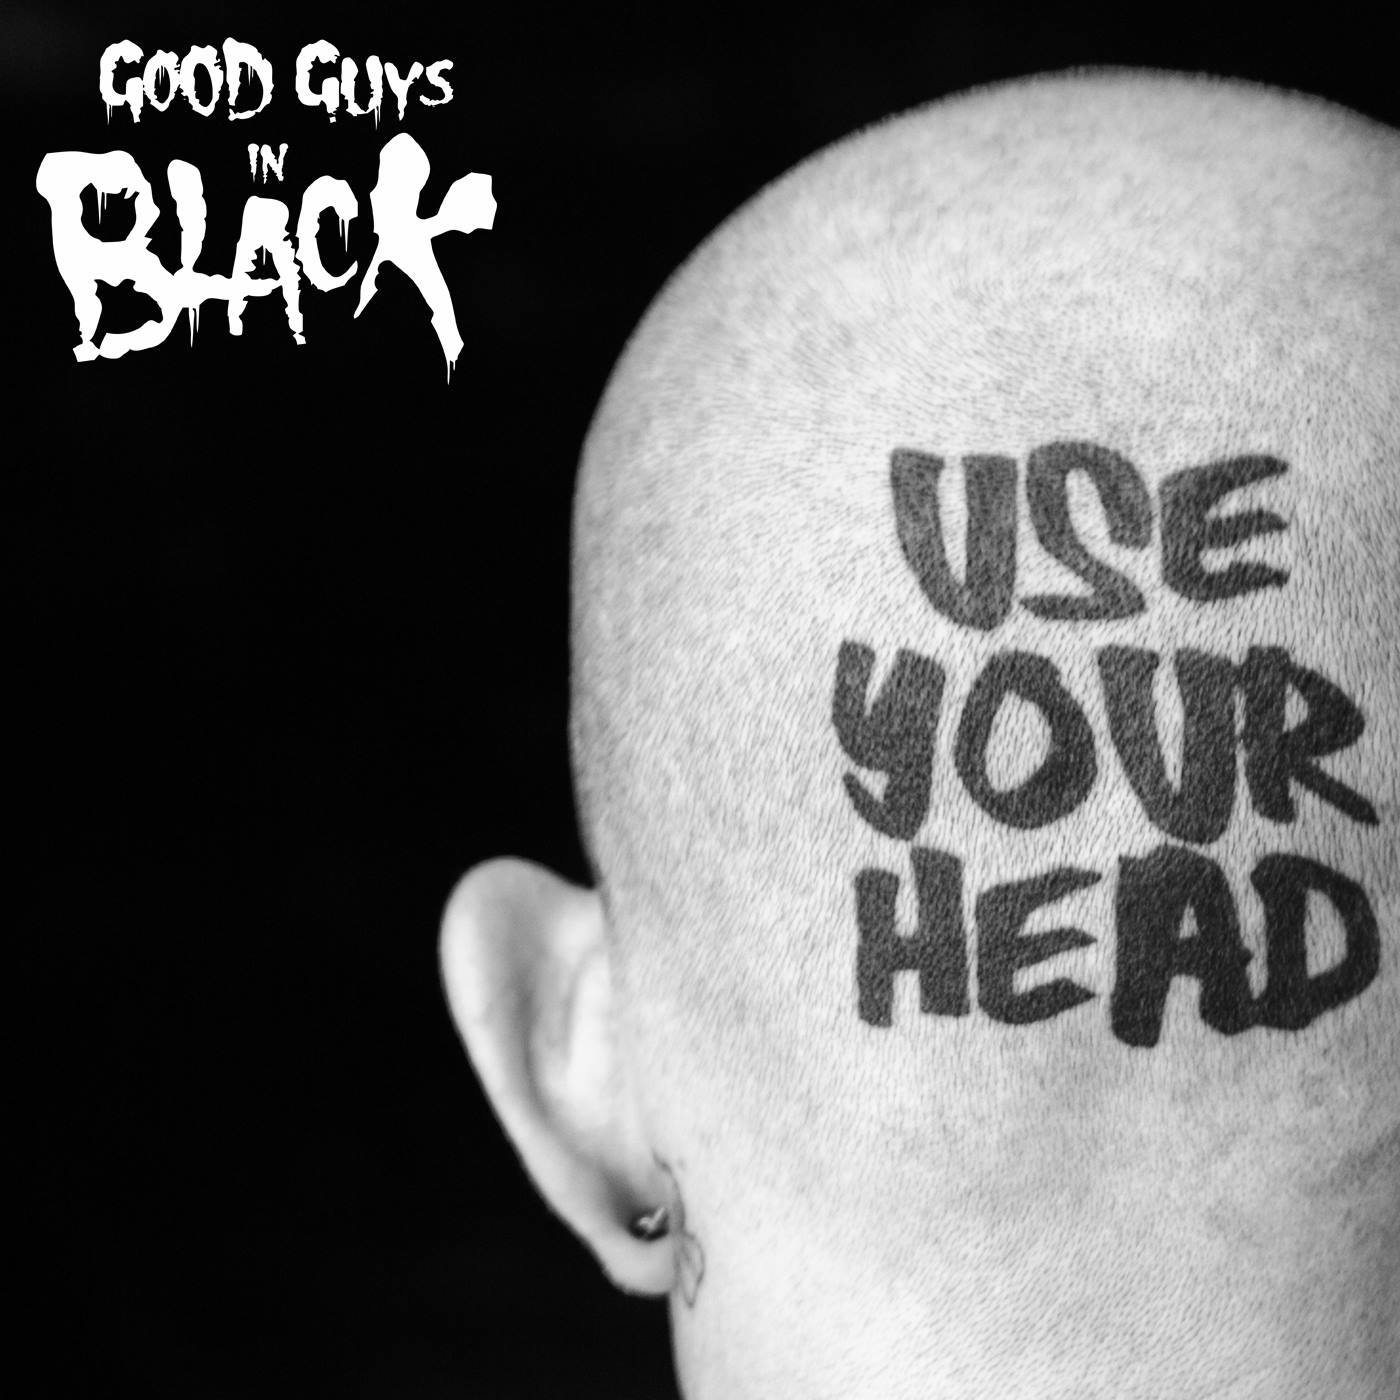 Good guys only. The good guy. In your head.